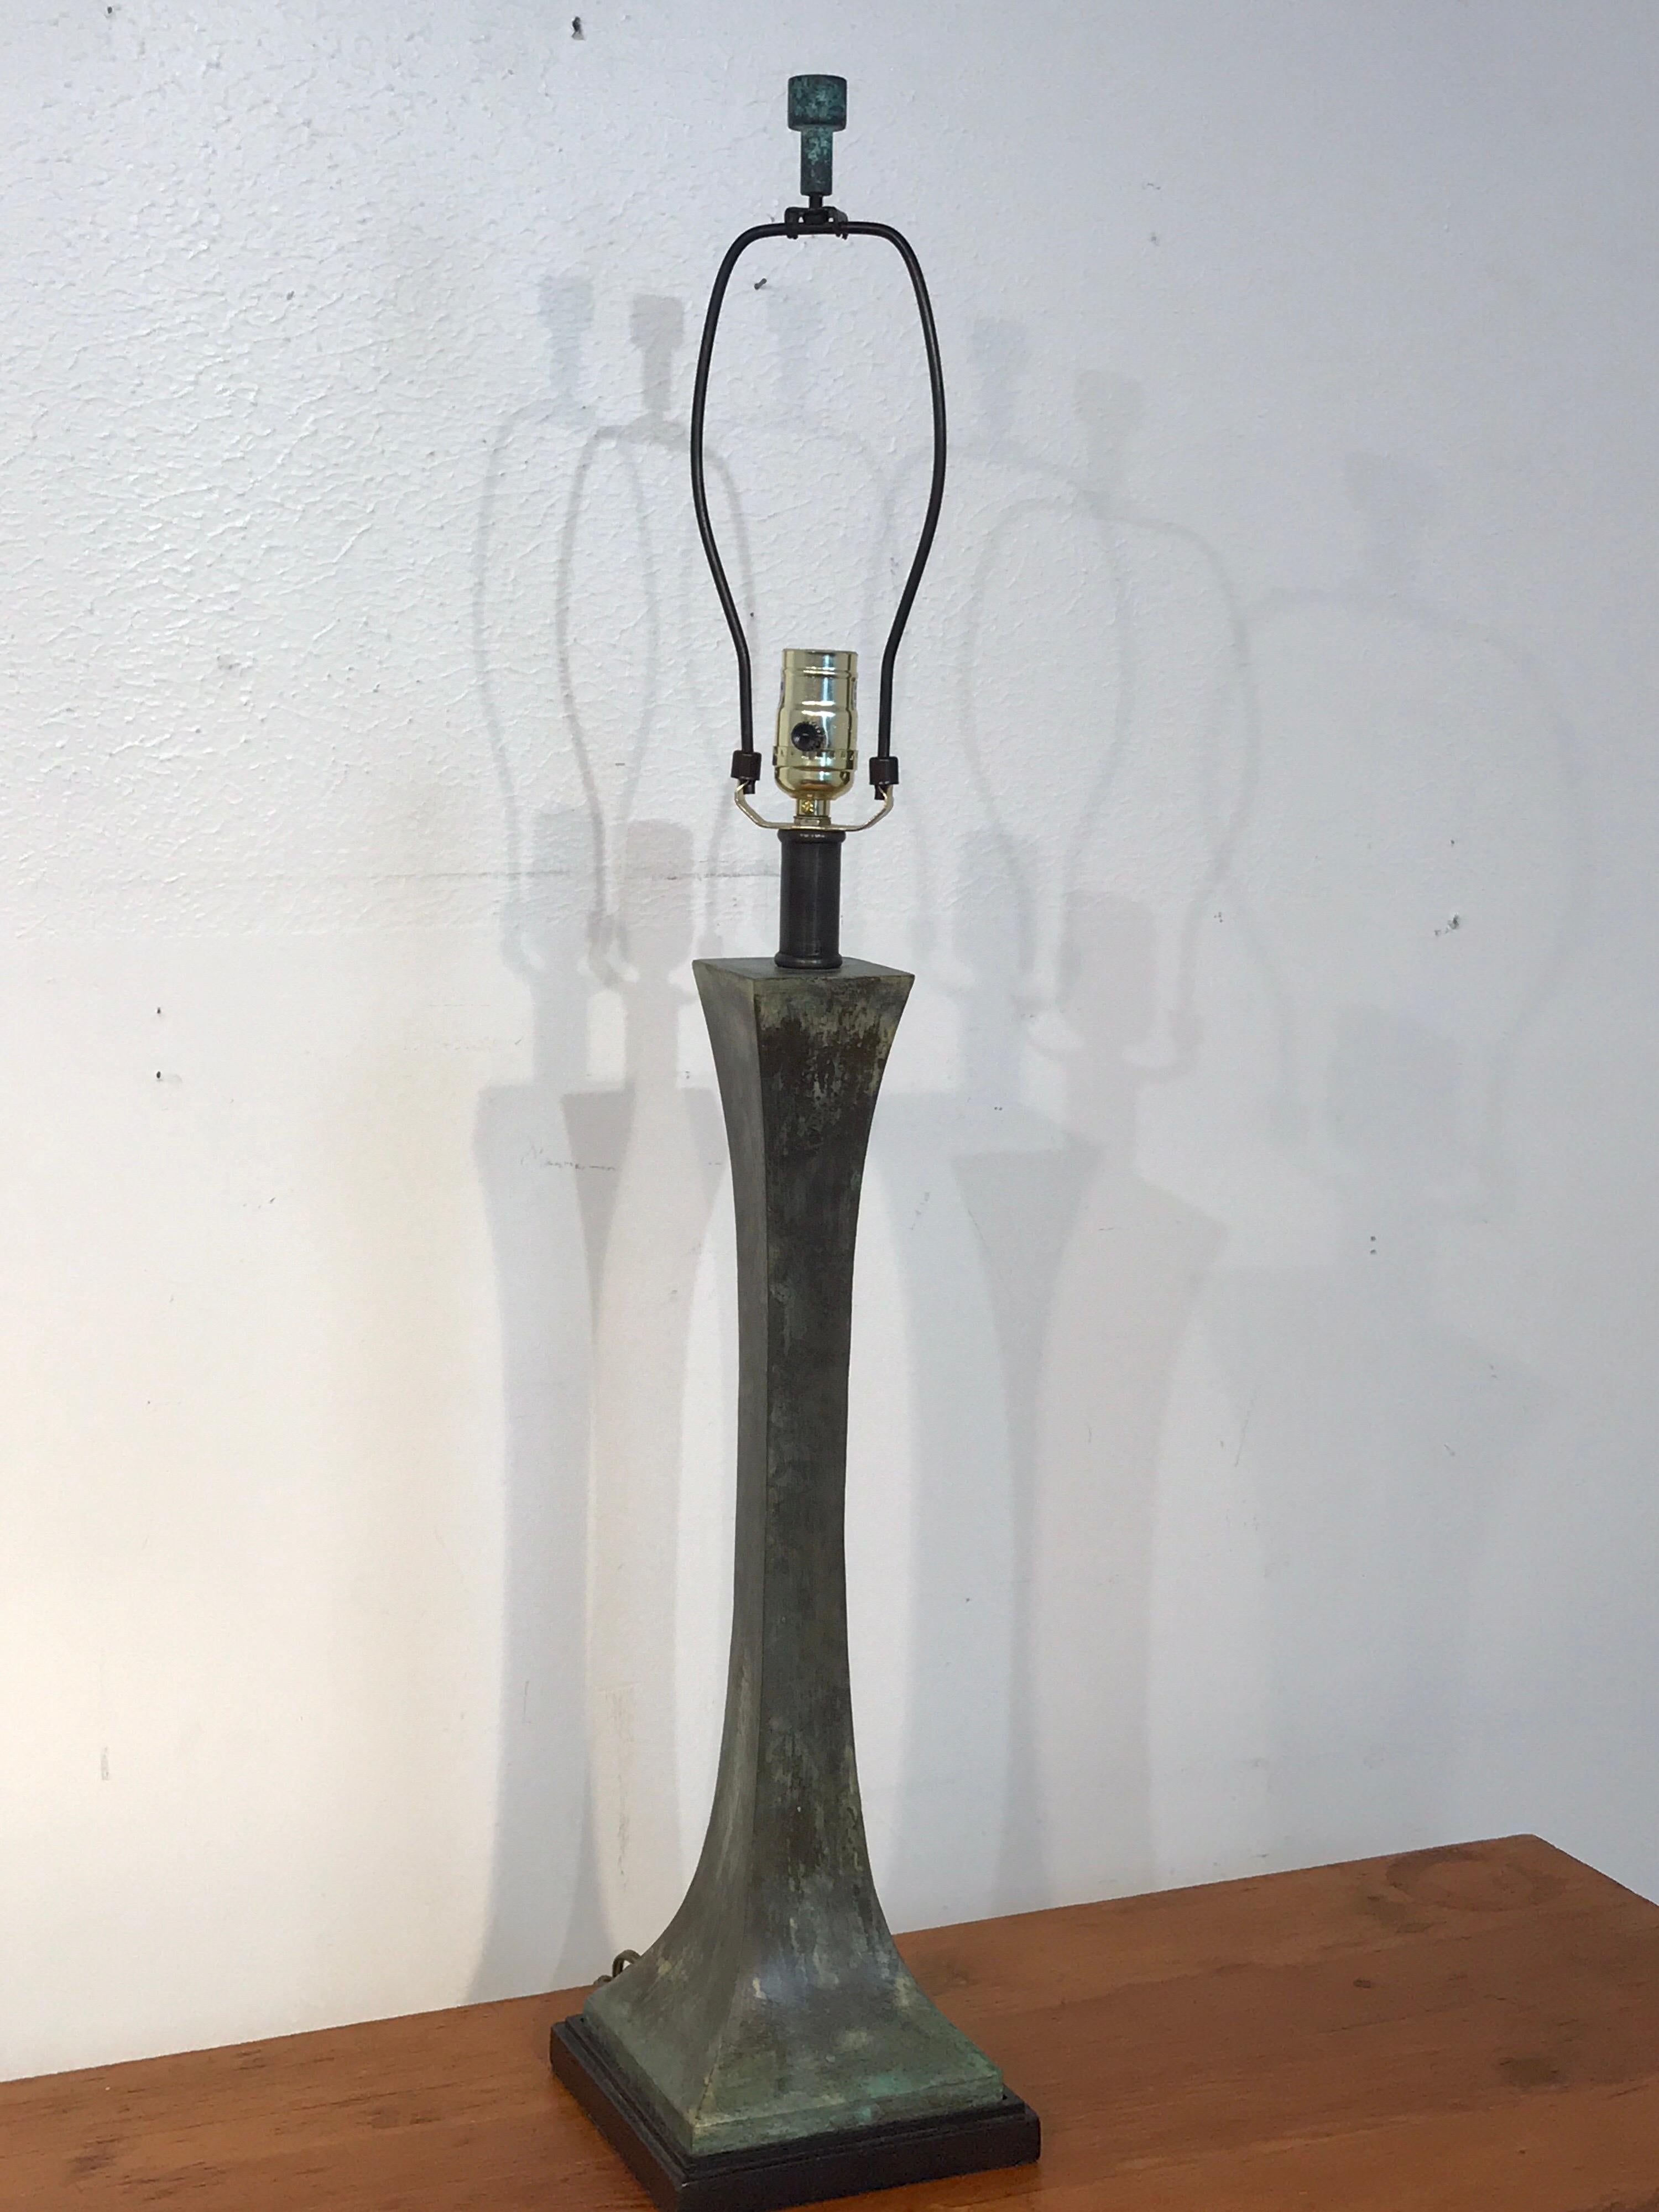 Verdigris patinated bronze table lamp by S. R. James for Hansen, complete with verdigris lamp finial, raised on a patinated bronze conforming base. Newly wired.
25